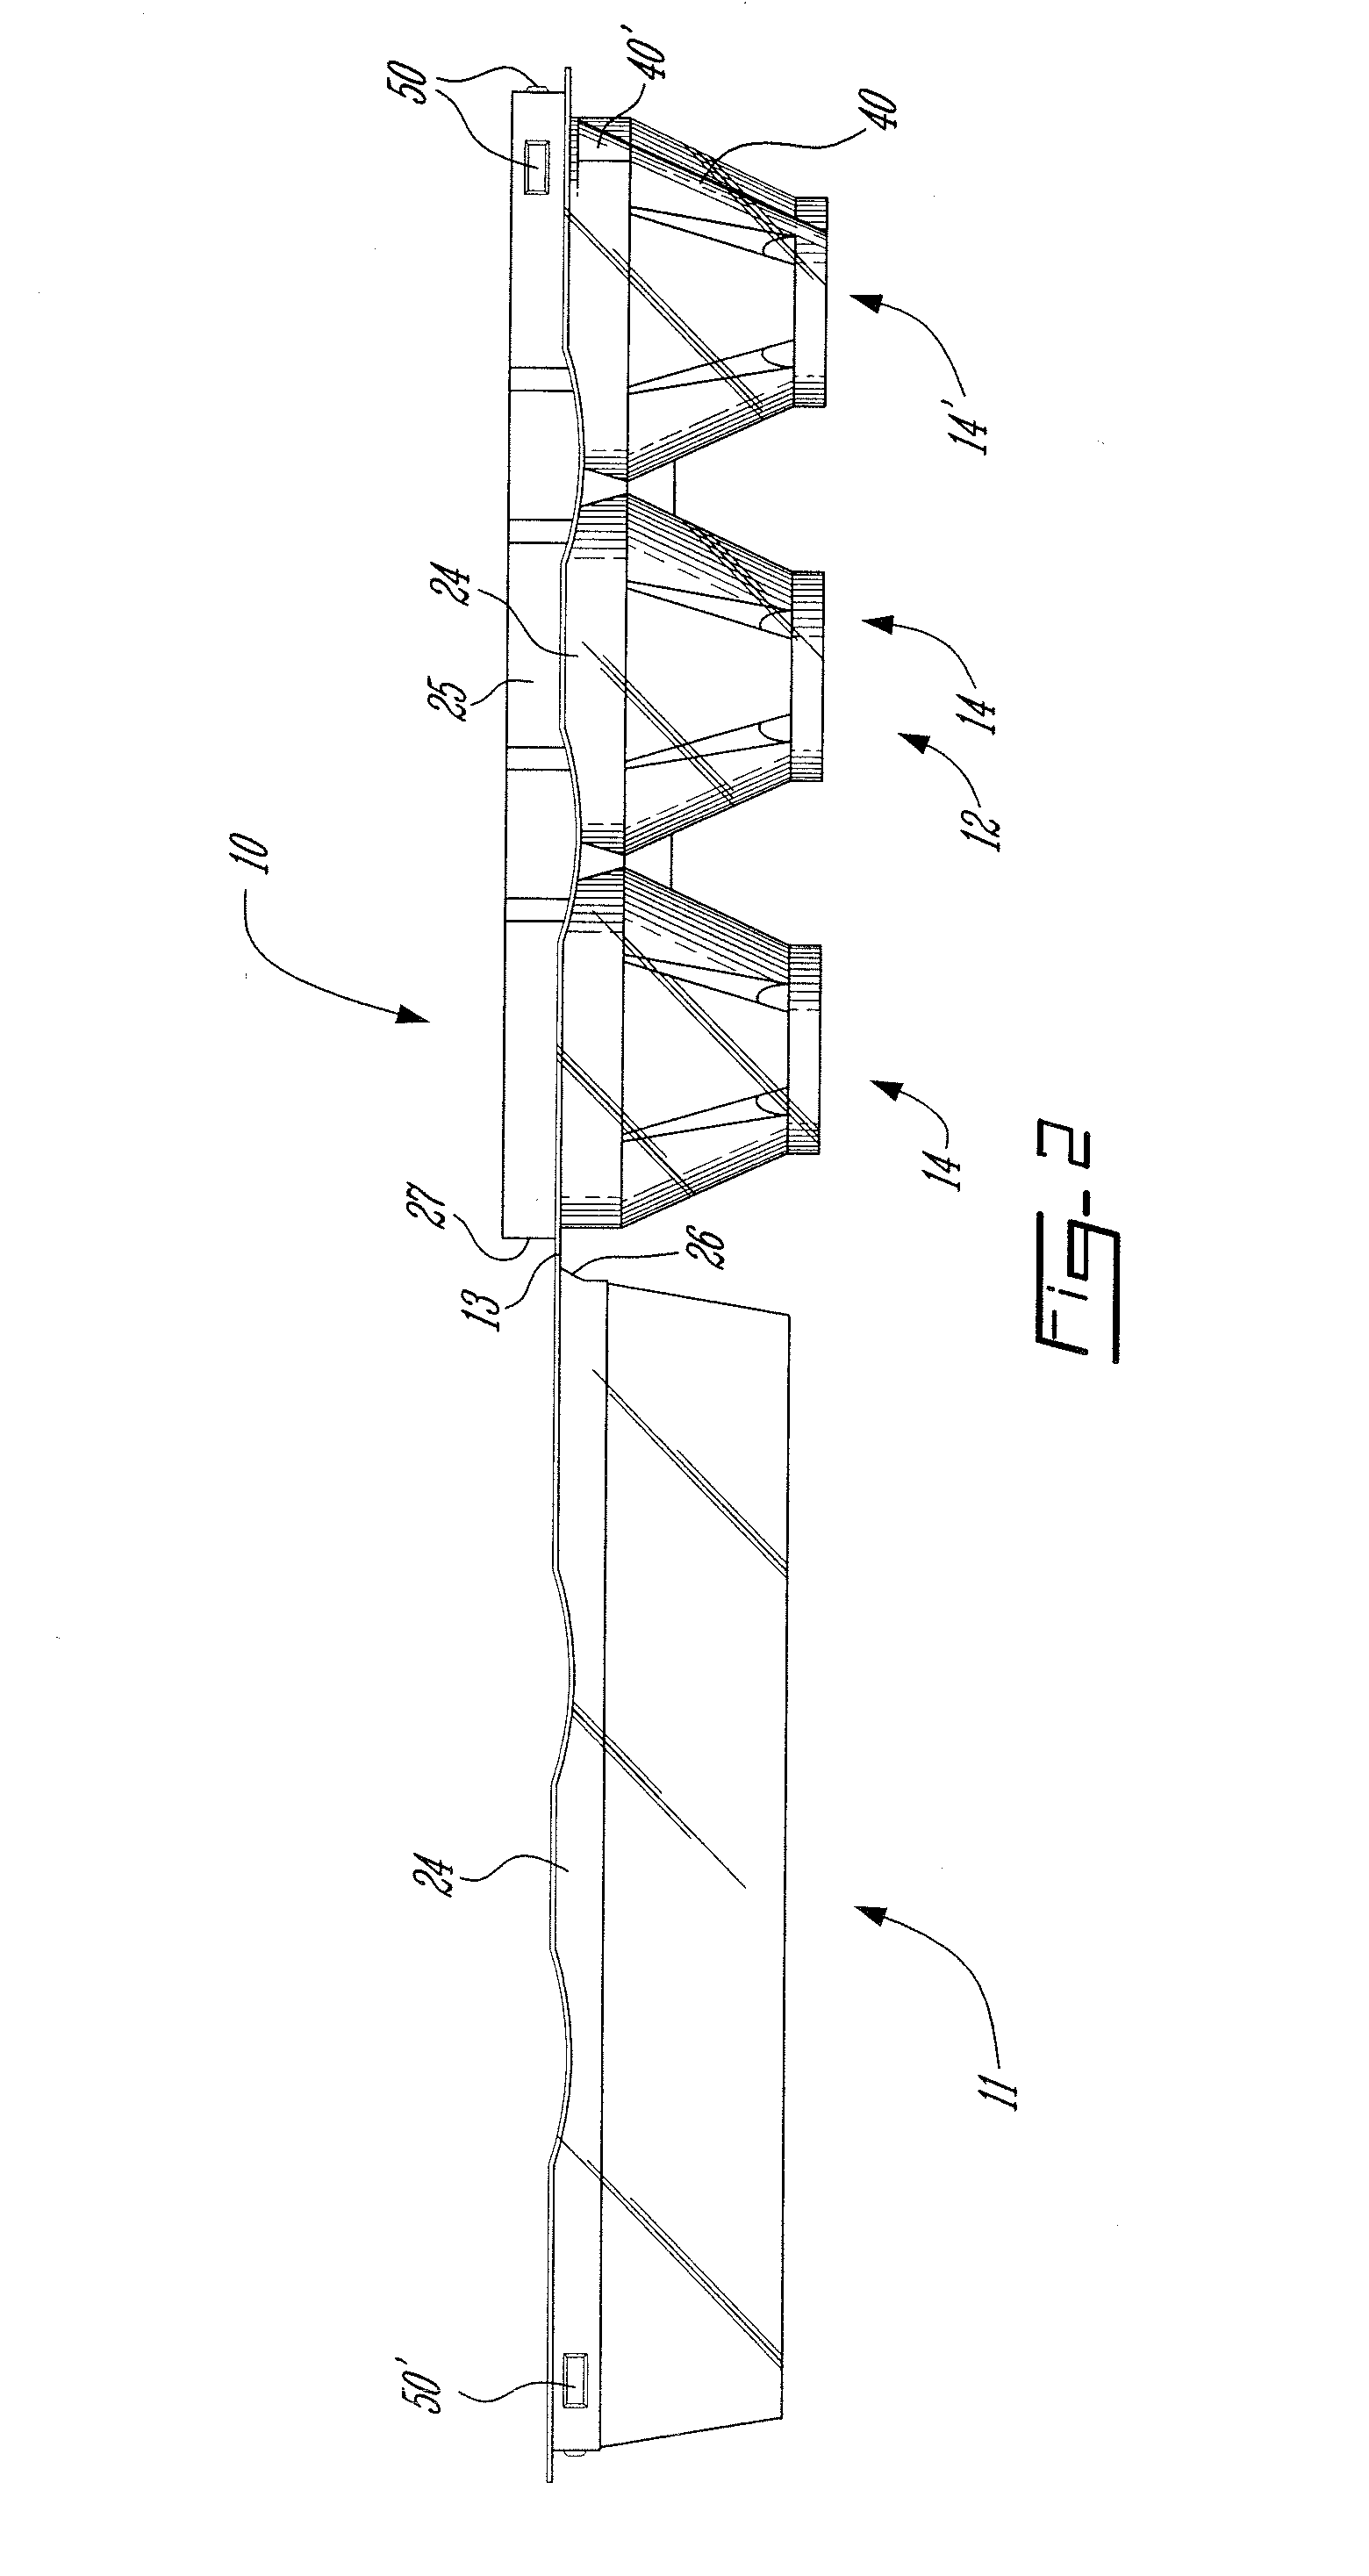 Container for frangible articles such as eggs